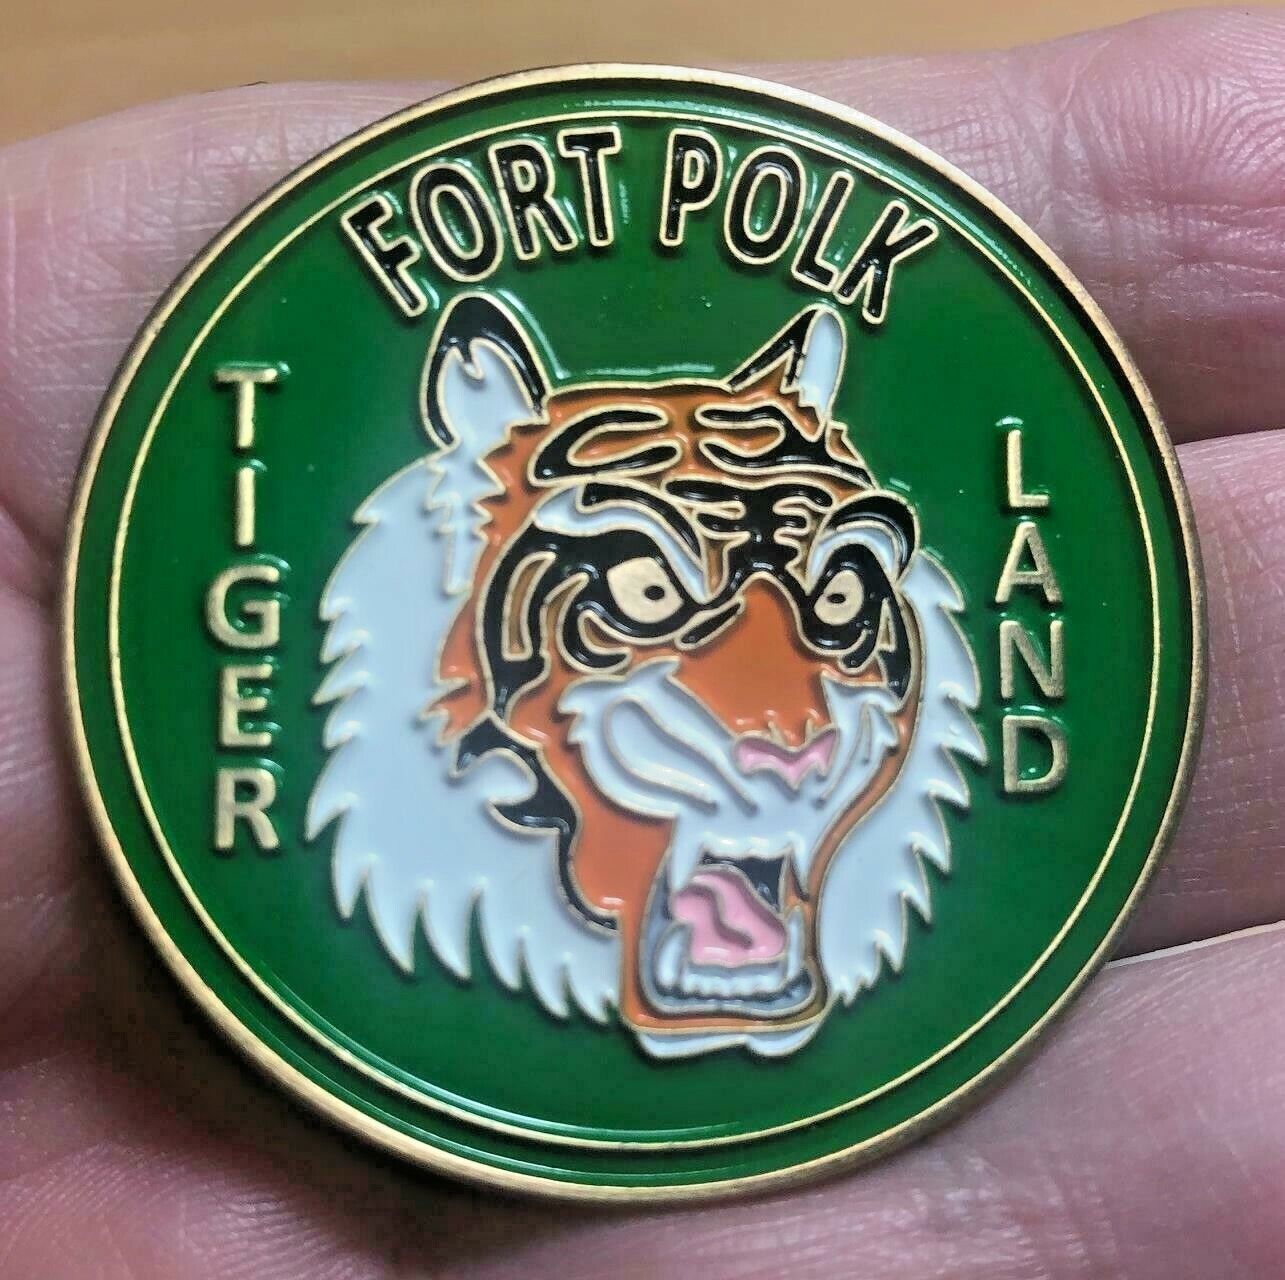 US ARMY FORT POLK TIGER LAND CHALLENGE COIN TIGERLAND...ONE OF A KIND